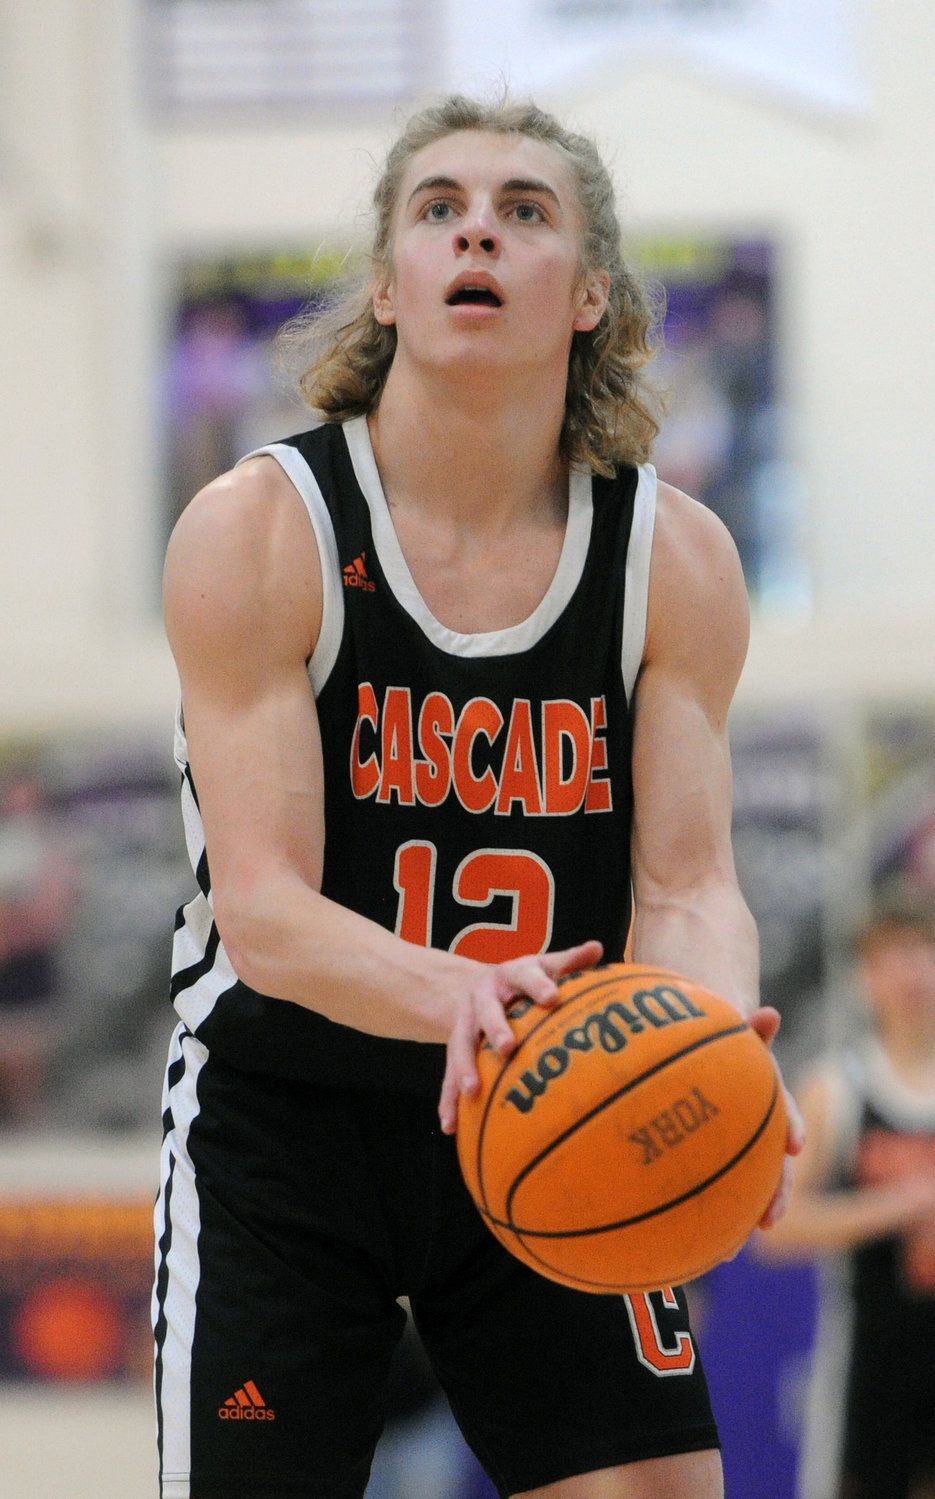 Lucas Clanton steps to the line and knocks down a free throw. He scored 17 points in his final game with Cascade and finished his career just 44 points shy of the all-time scoring record at Cascade.